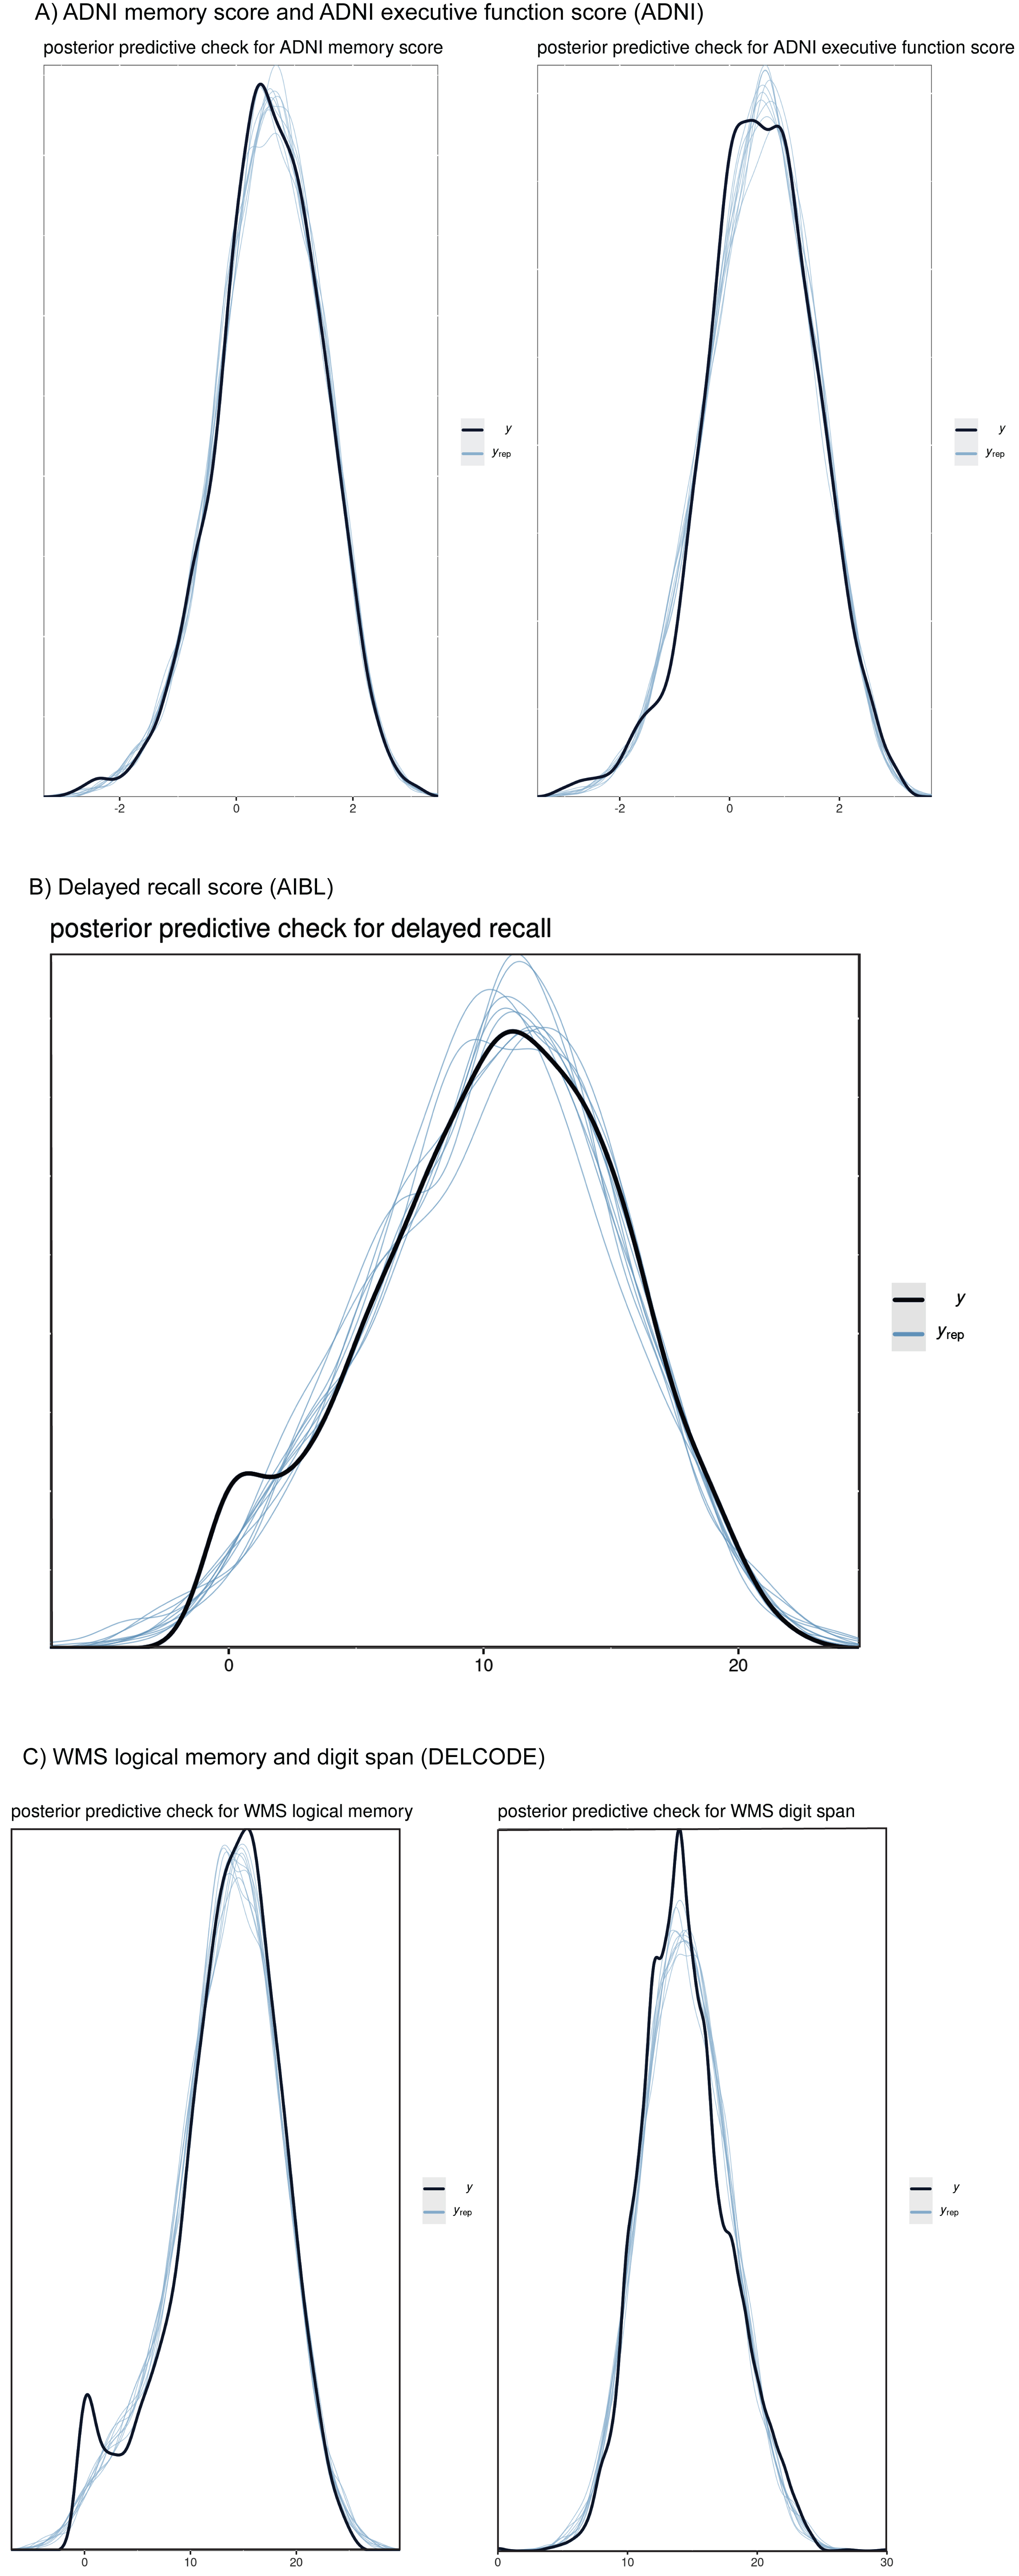 Posterior predictive checks for cognitive outcomes. Plots comparing the observed outcome variables y (black line) to simulated datasets yrep (blue lines) from the posterior predictive distribution. The plots show the dependent variables ADNI memory score and ADNI executive function score (ADNI, A), delayed recall score (AIBL, B), and WMS logical memory and digit span (DELCODE, C), and 10 samples each from the posterior distribution. The posterior distribution was assessed from mixed effect regression models, predicting cognitive scores by diagnosis and its interaction term with time and age and sex with random intercept and slope, nested within individuals. We used a Gaussian distribution for all dependent variables.